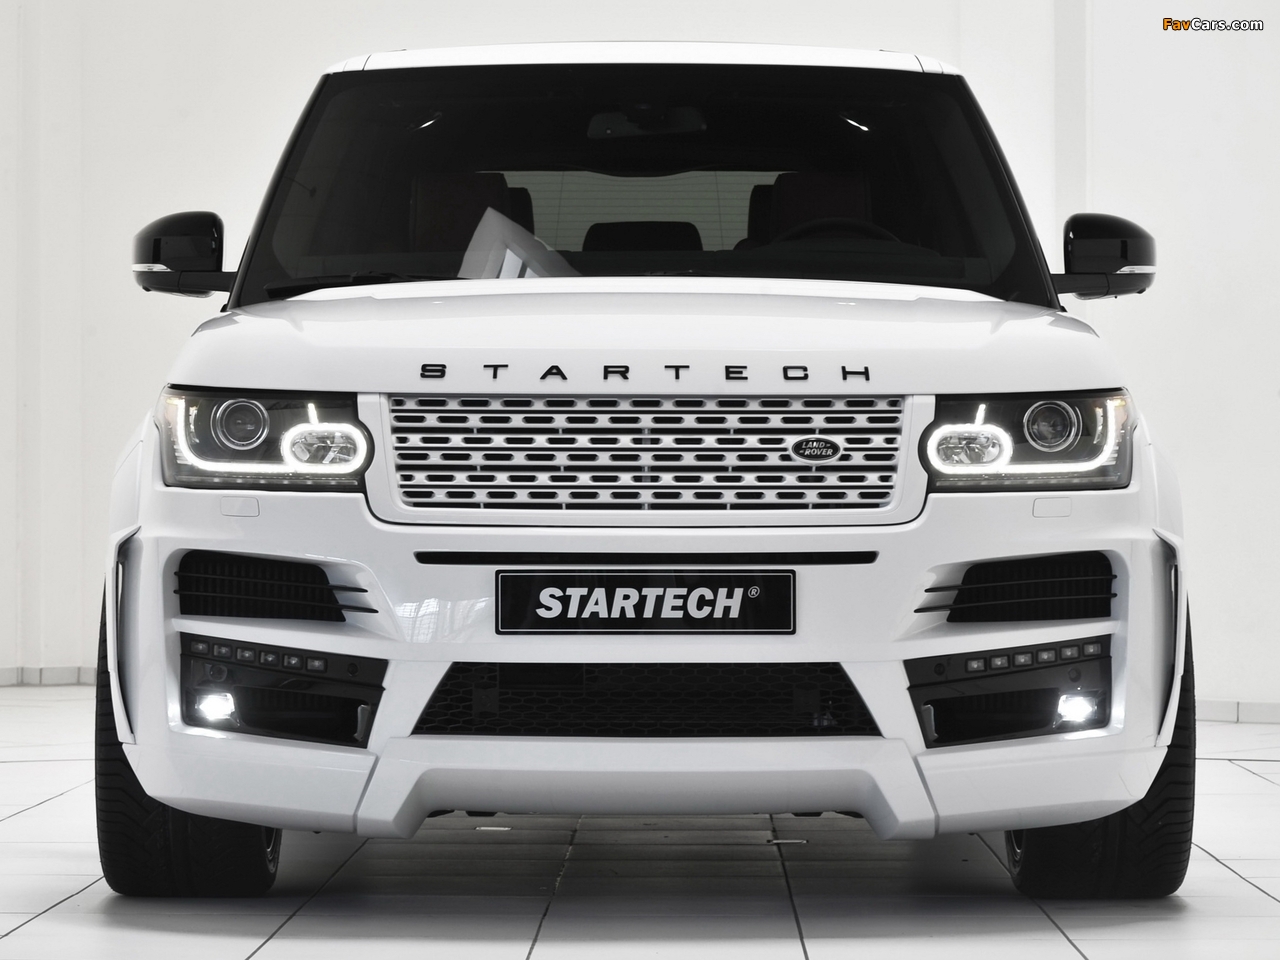 Startech Range Rover (L405) 2013 pictures (1280 x 960)